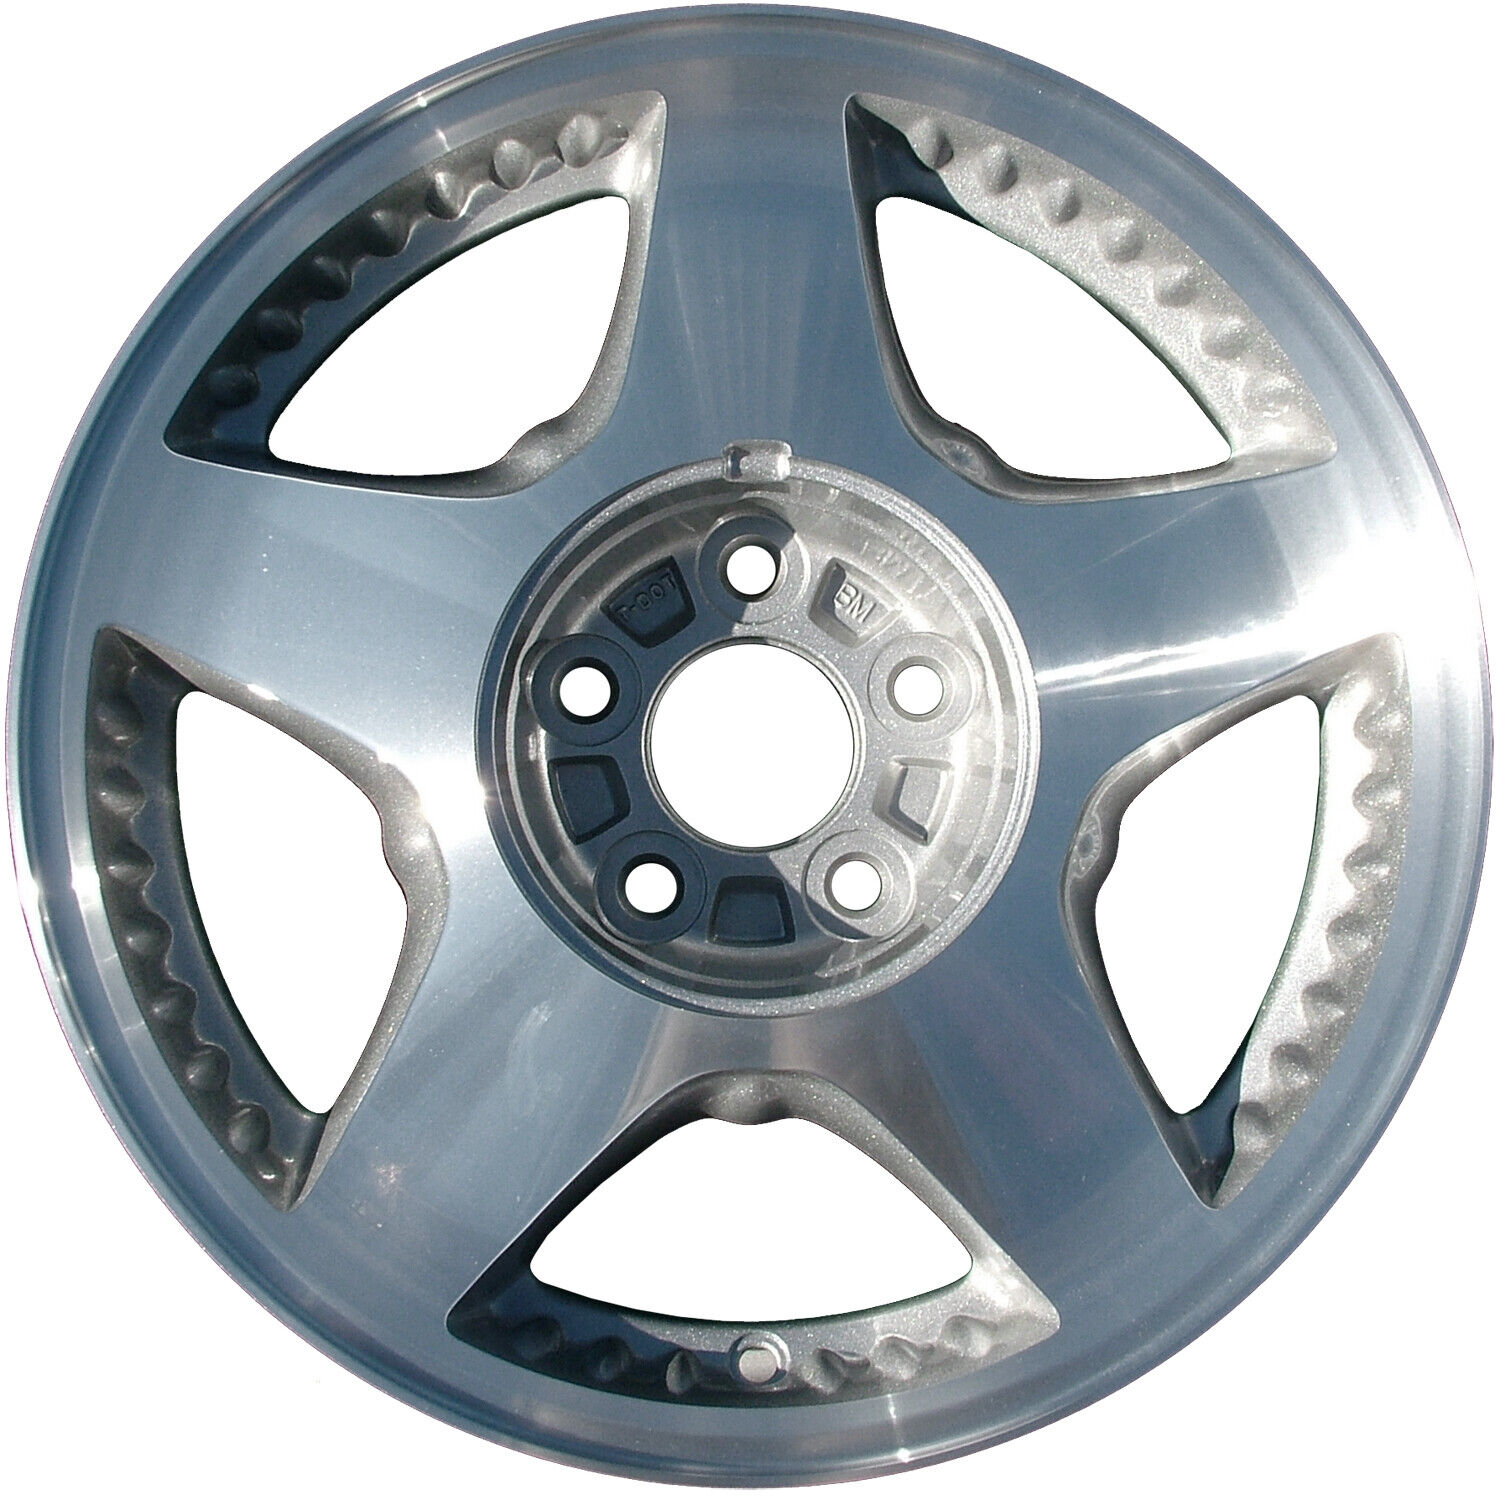 03565 Reconditioned OEM Aluminum Wheel 16x6.5 fits 1999-2003 Ford Windstar